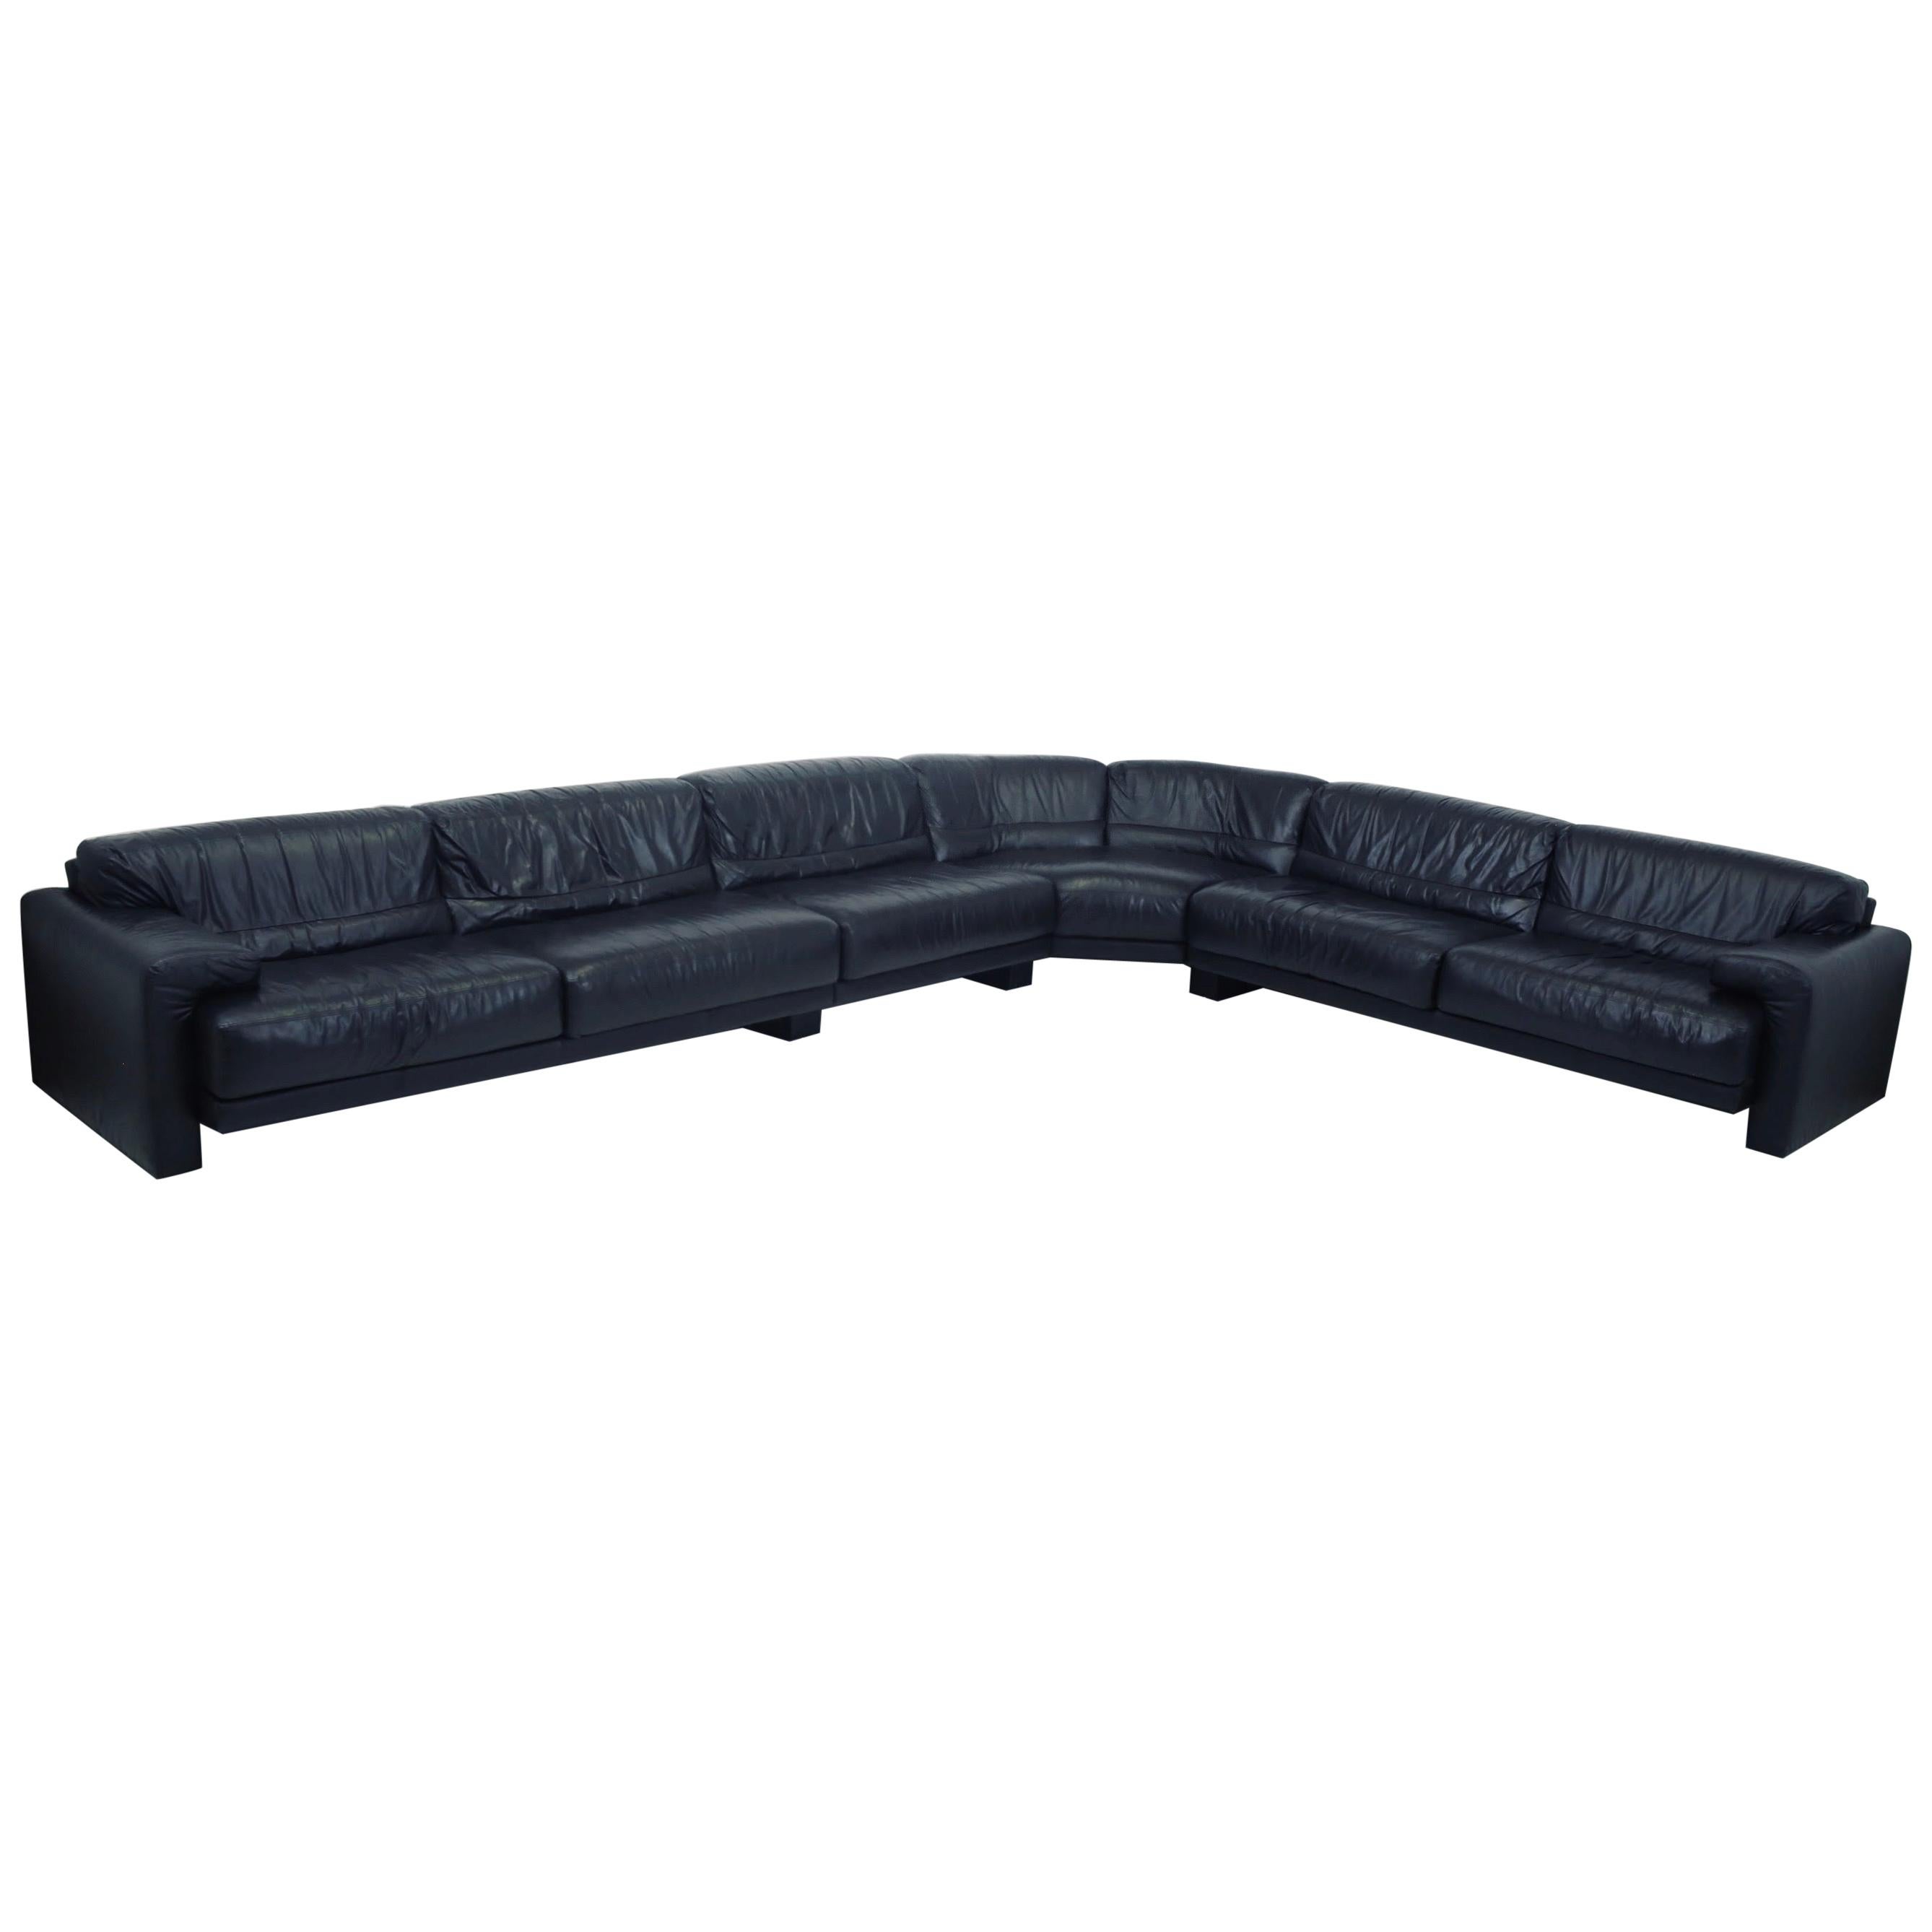 Large scale black leather sectional made by Preview furniture. A sectional version of the “Midday sofa series” produced by Saporiti in 1981. Original leather is in very good condition. Each section is 40” deep. Total measurement is 131” x 176”.